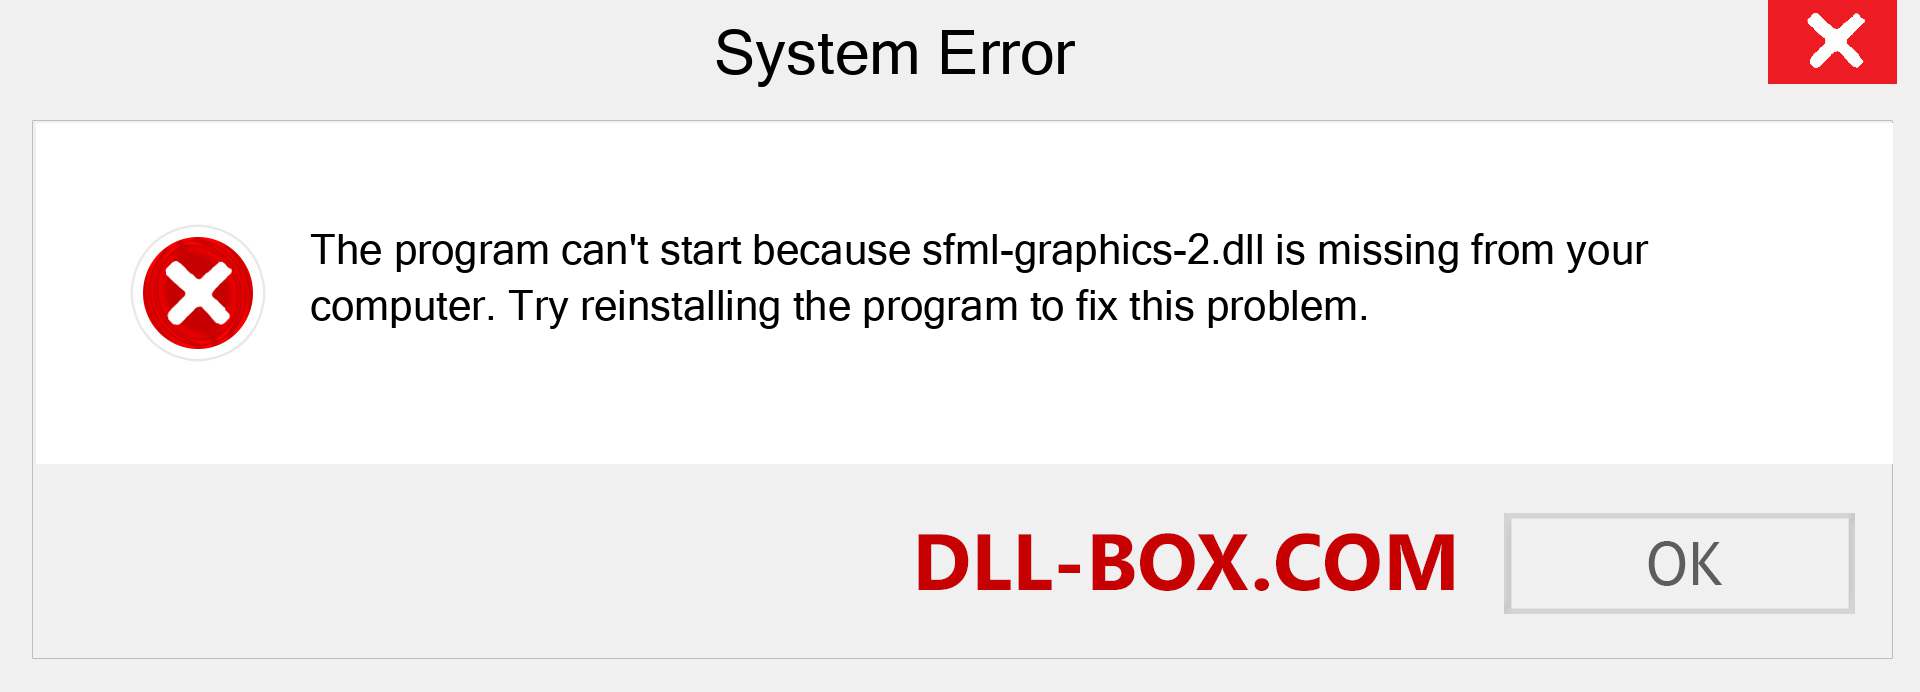  sfml-graphics-2.dll file is missing?. Download for Windows 7, 8, 10 - Fix  sfml-graphics-2 dll Missing Error on Windows, photos, images